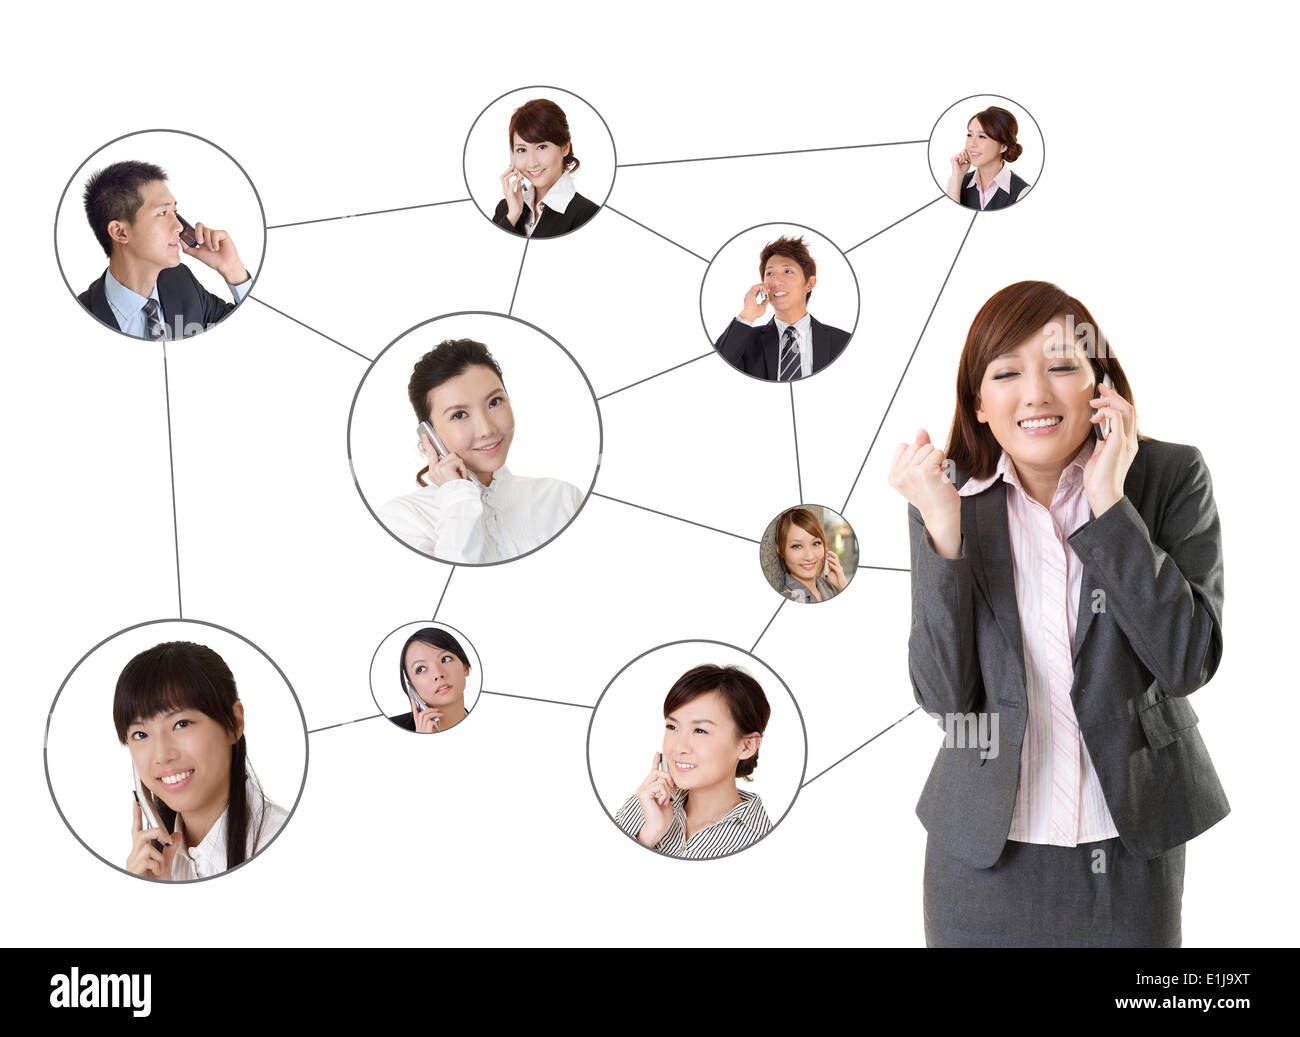 Business network Stock Photo